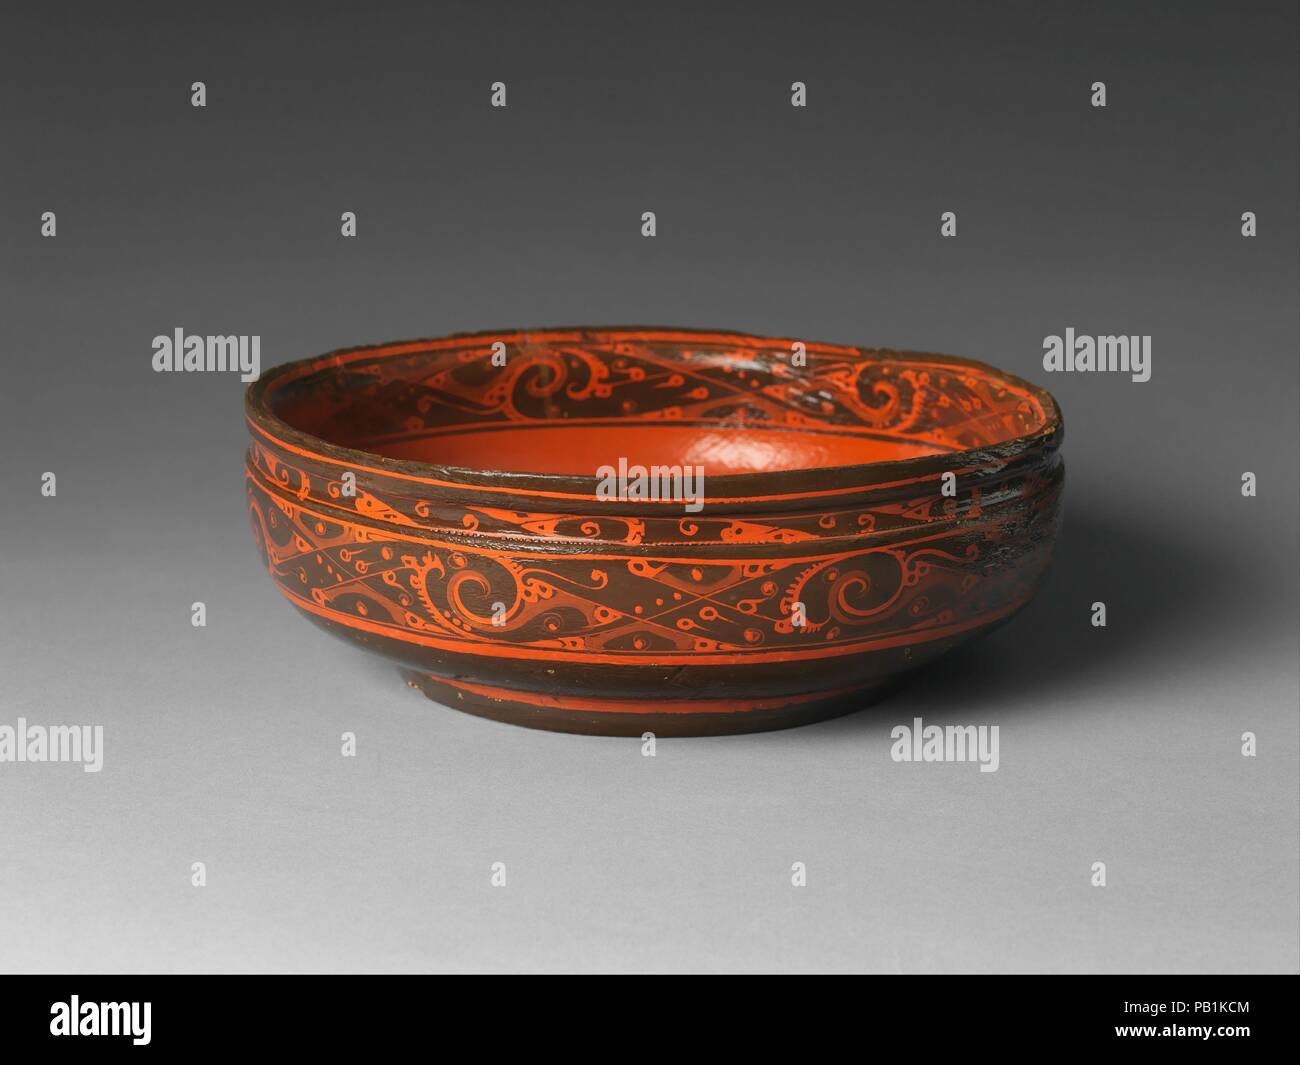 Bowl with Geometric Designs. Culture: China. Dimensions: H. 3 5/8 in. (9.2 cm); Diam. 10 7/16 in. (26.5 cm). Date: 2nd century B.C..  Likely used for serving a liquid such as wine or soup, this bowl is painted with dramatic swirling lines interlaced with small curls and other forms. Known as cloud energy, or yunqi,  this design, which was pervasive during the Western Han dynasty, is understood to represent a forbidding but numinous realm inhabited by immortals. Museum: Metropolitan Museum of Art, New York, USA. Stock Photo